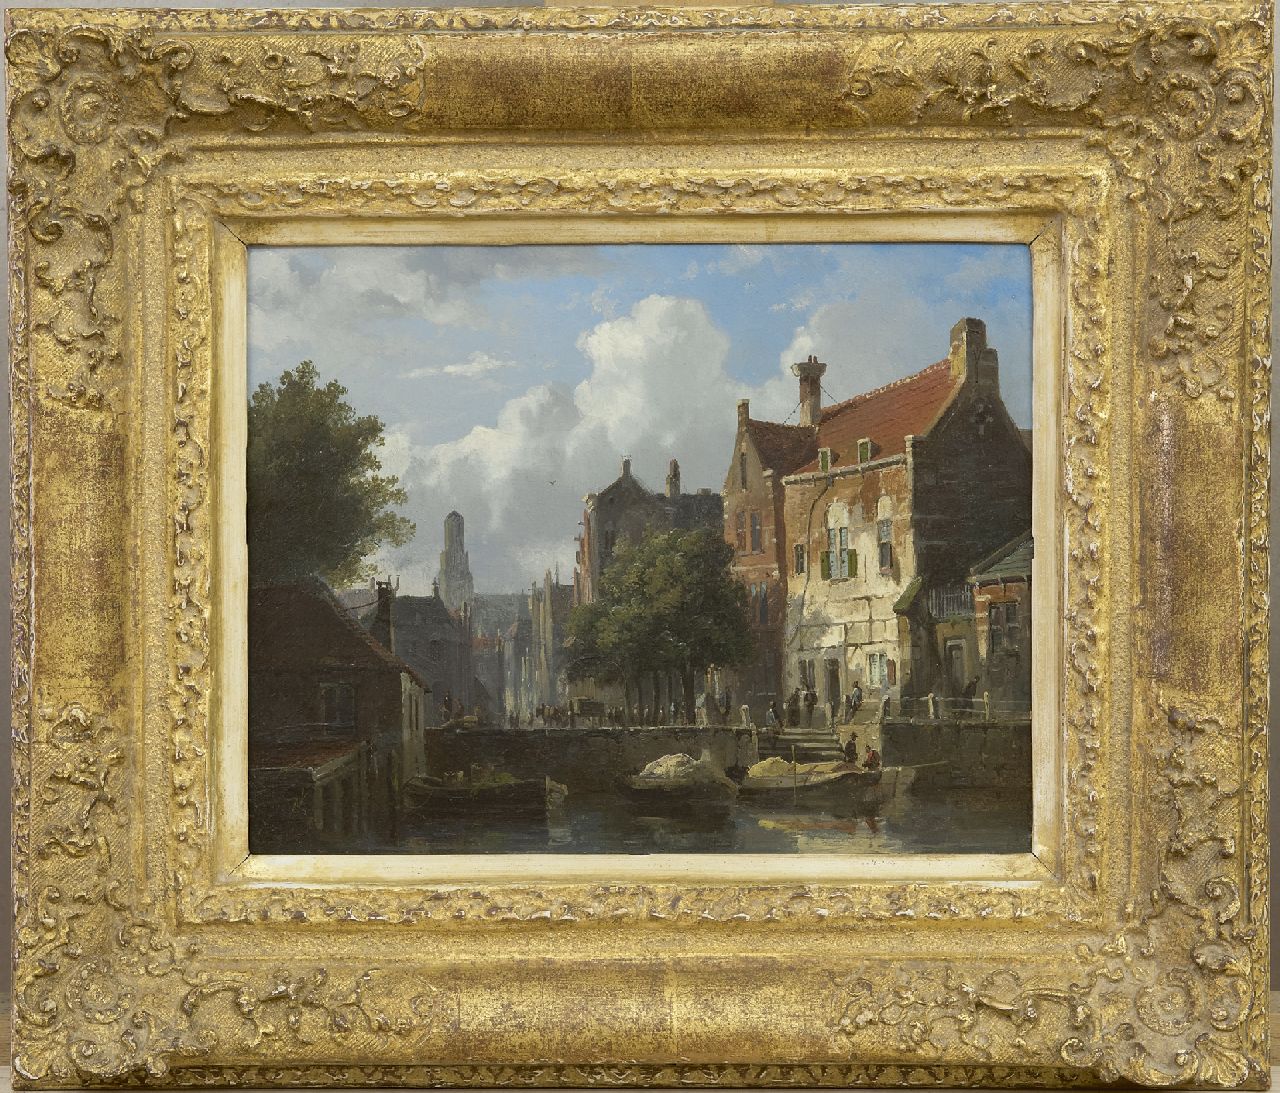 Eversen A.  | Adrianus Eversen, A town view with a canal, oil on panel 15.0 x 19.1 cm, signed l.l.